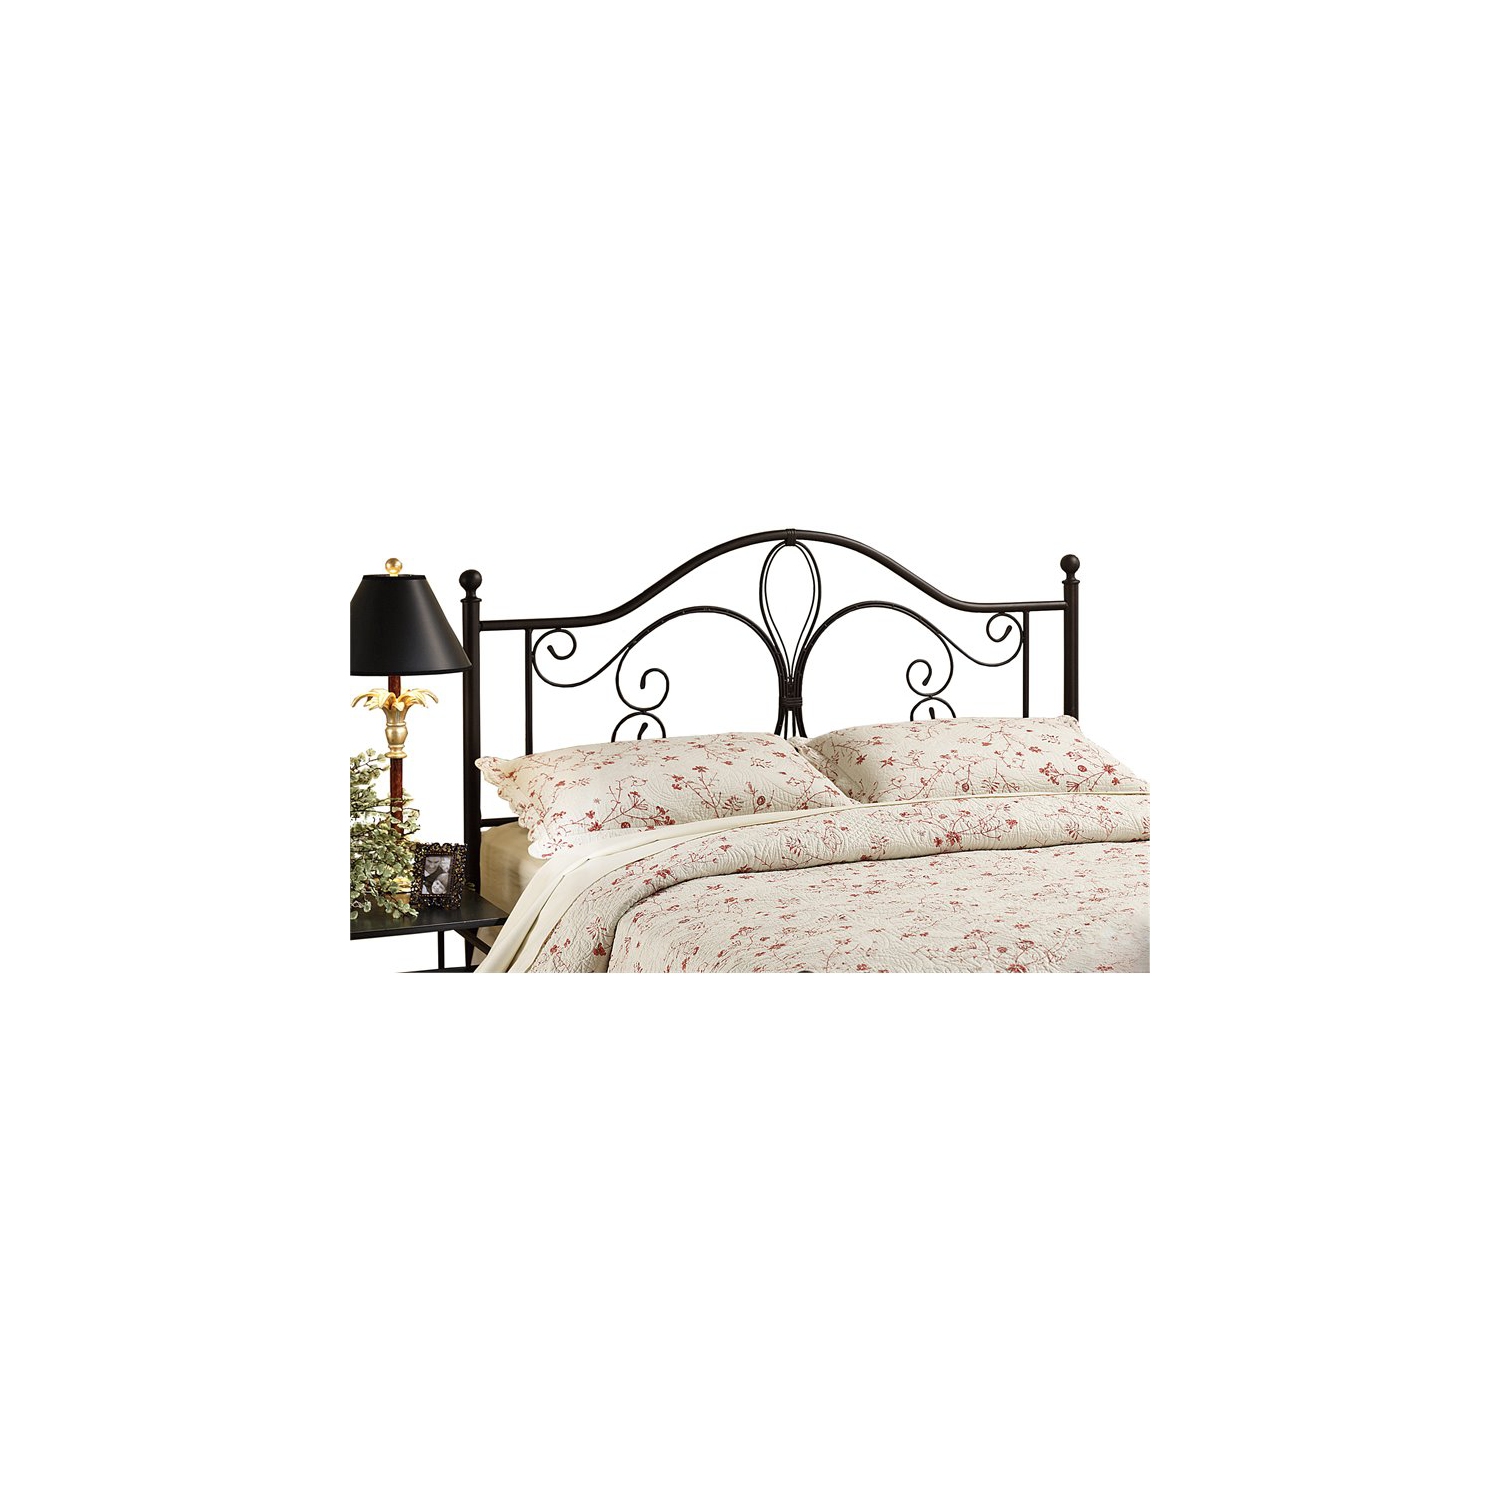 Hillsdale Milwaukee King Poster Headboard in Antique Brown